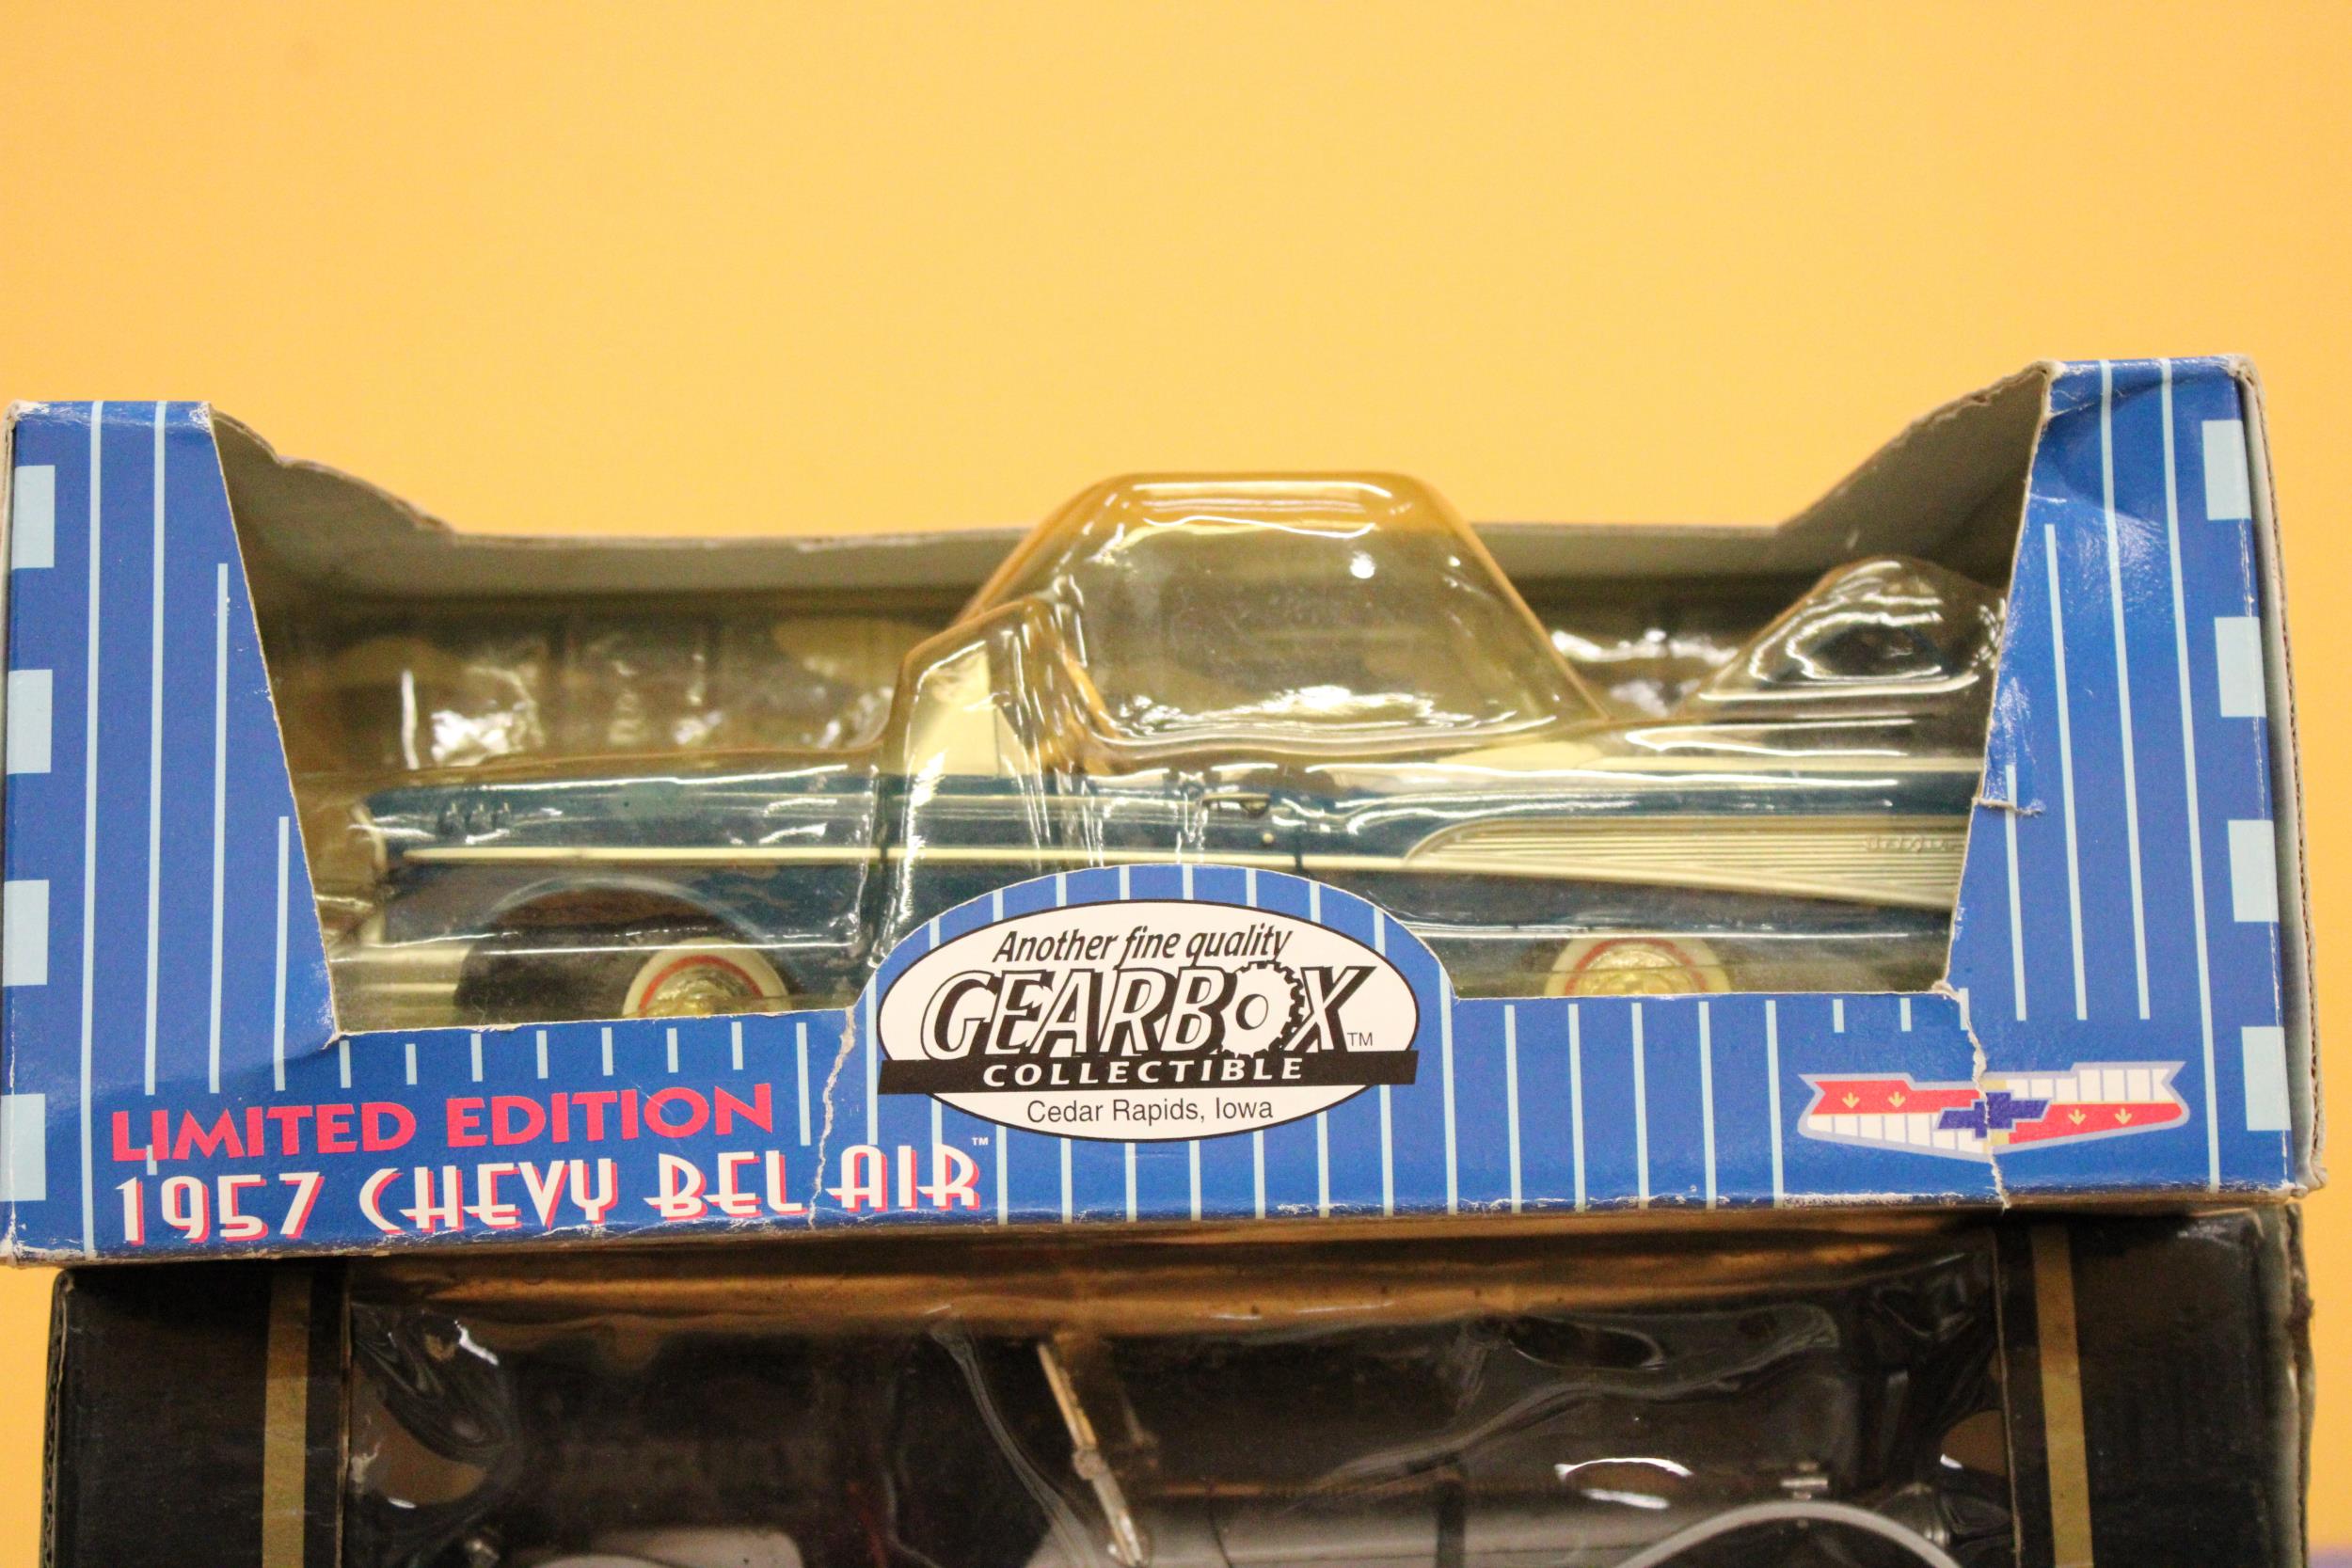 THREE VINTAGE BOXED TOY CARS TO INCLUDE A LIMITED EDITION 1947 CHEVY BEL AIR, JAGUAR AND A ALFA - Image 4 of 6